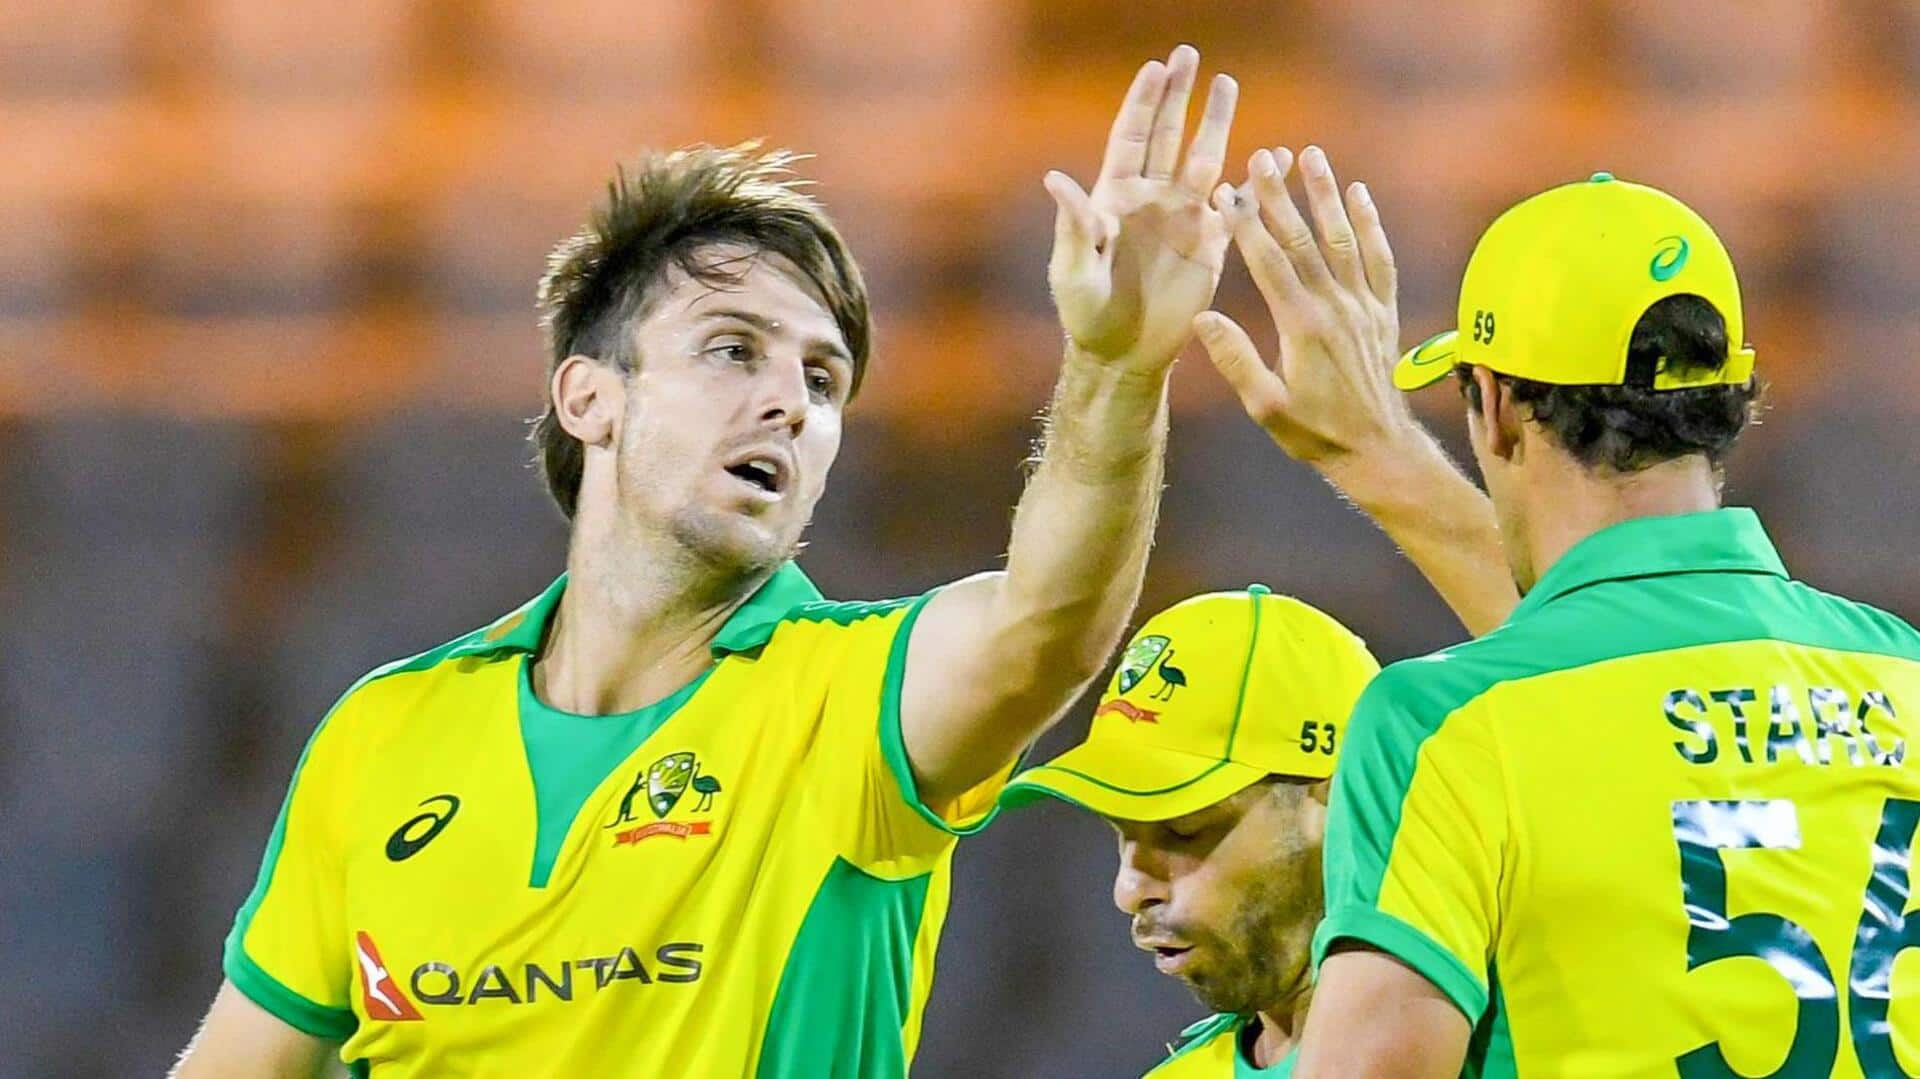 Mitchell Marsh could lead Australia in ICC T20 World Cup